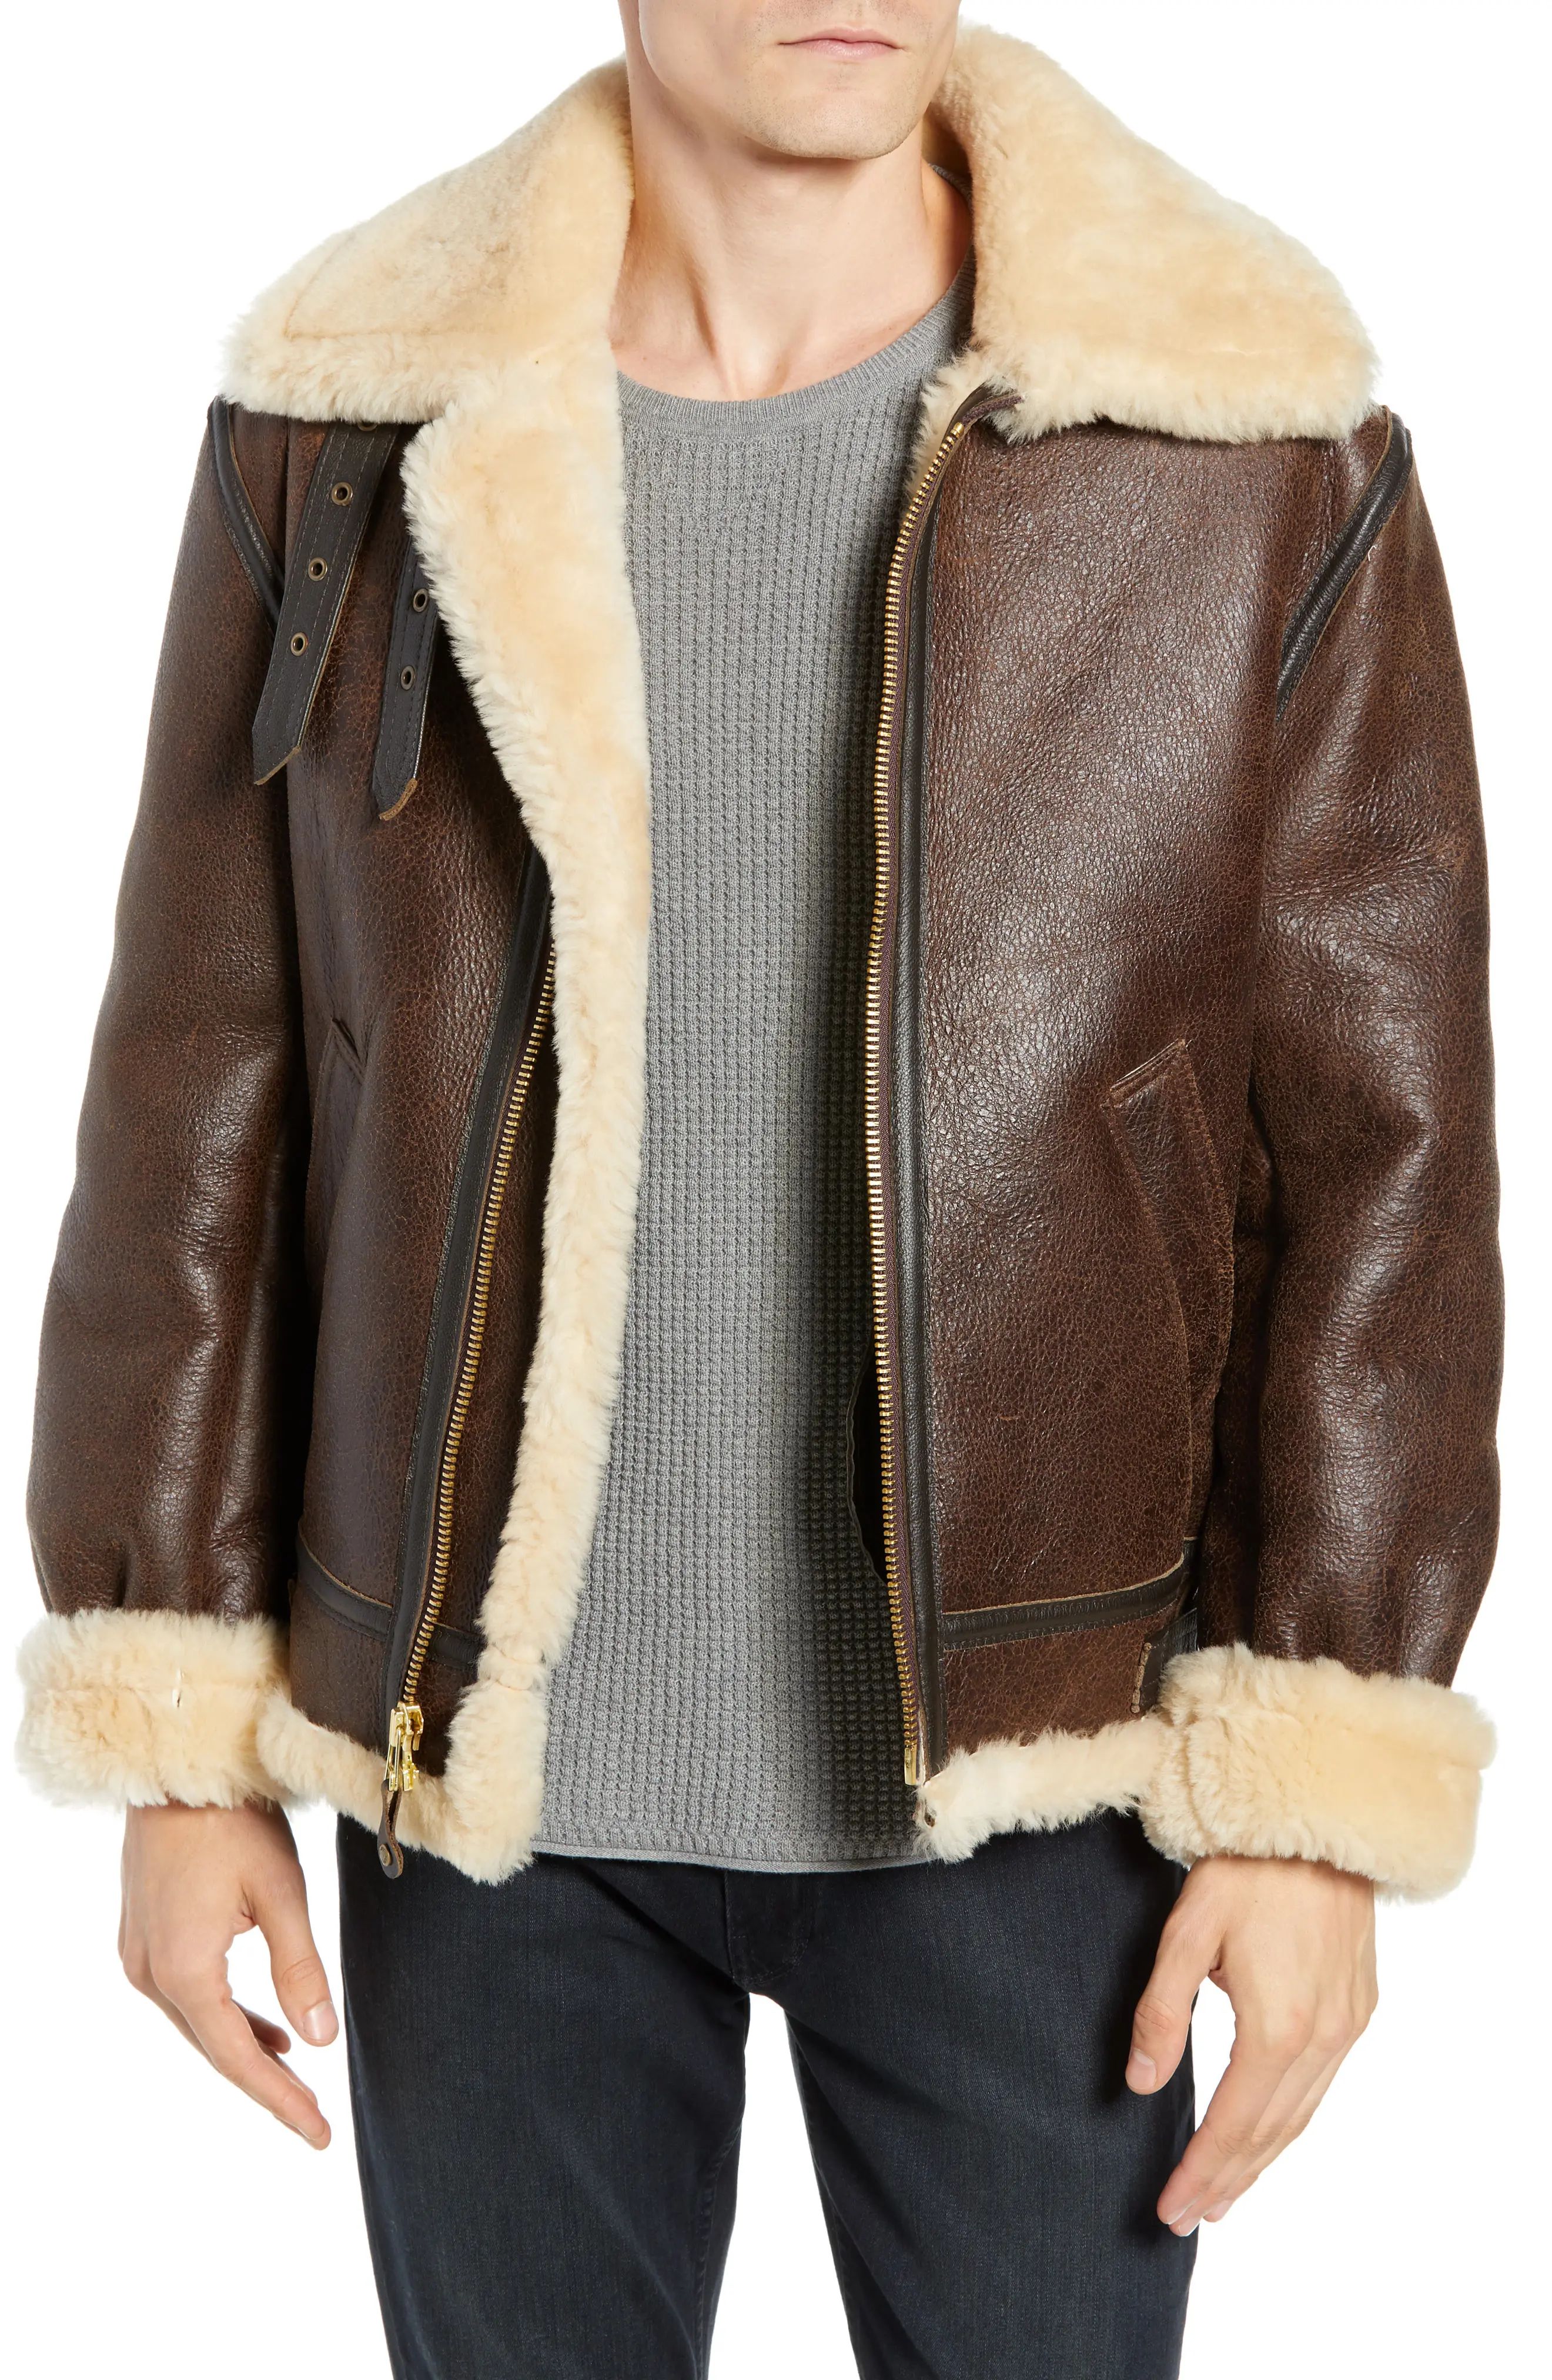 Men's Schott Nyc Genuine Sheep Shearling B-13 Bomber Jacket, Size Small - Brown | Nordstrom